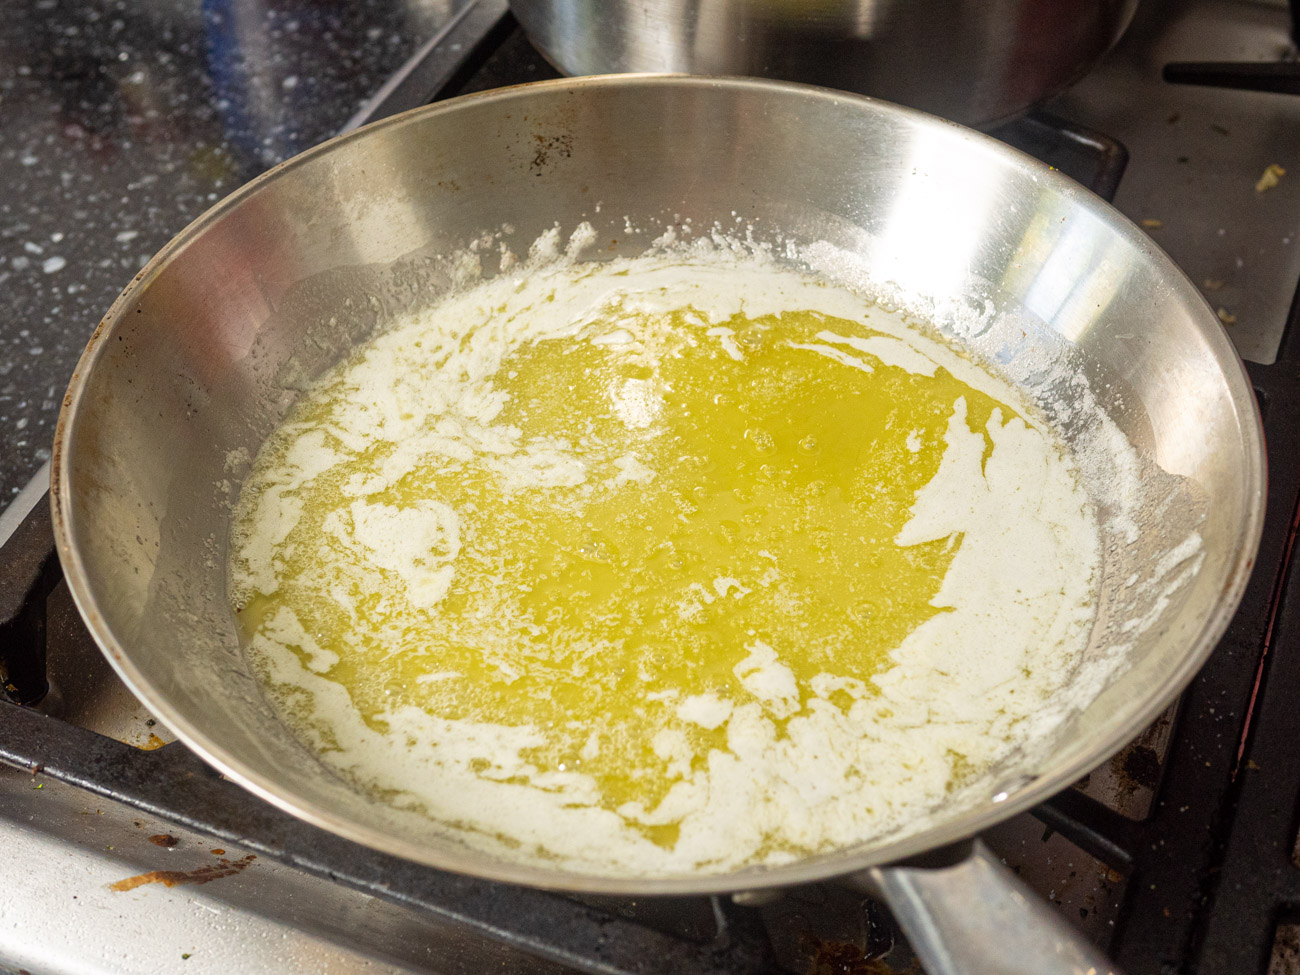 Melt butter in a saucepan over medium heat. Stir every 30 seconds or so until the butter has turned the color of caramel. This should take 3-5 minutes.